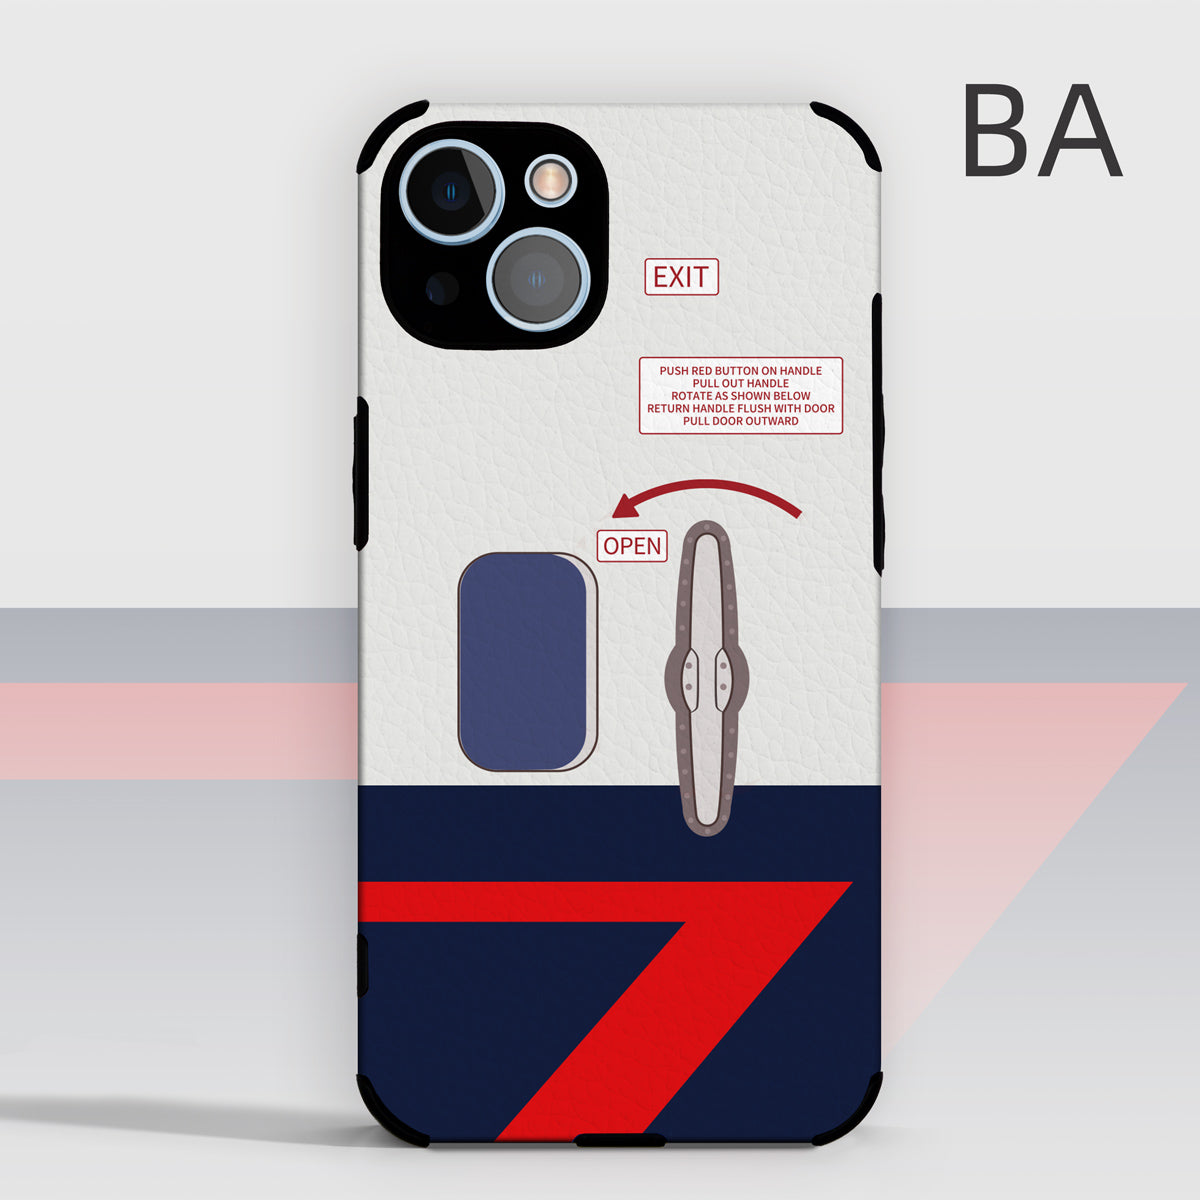 British Airways Boeing 747 phone case. Best aviation travel phone cover. Perfect gift for pilot, crew, flight attendant, frequent flyers. Apple Iphone 14 13 12 11 XS PRO MAX SE Xiaomi Huawei Samsung Android